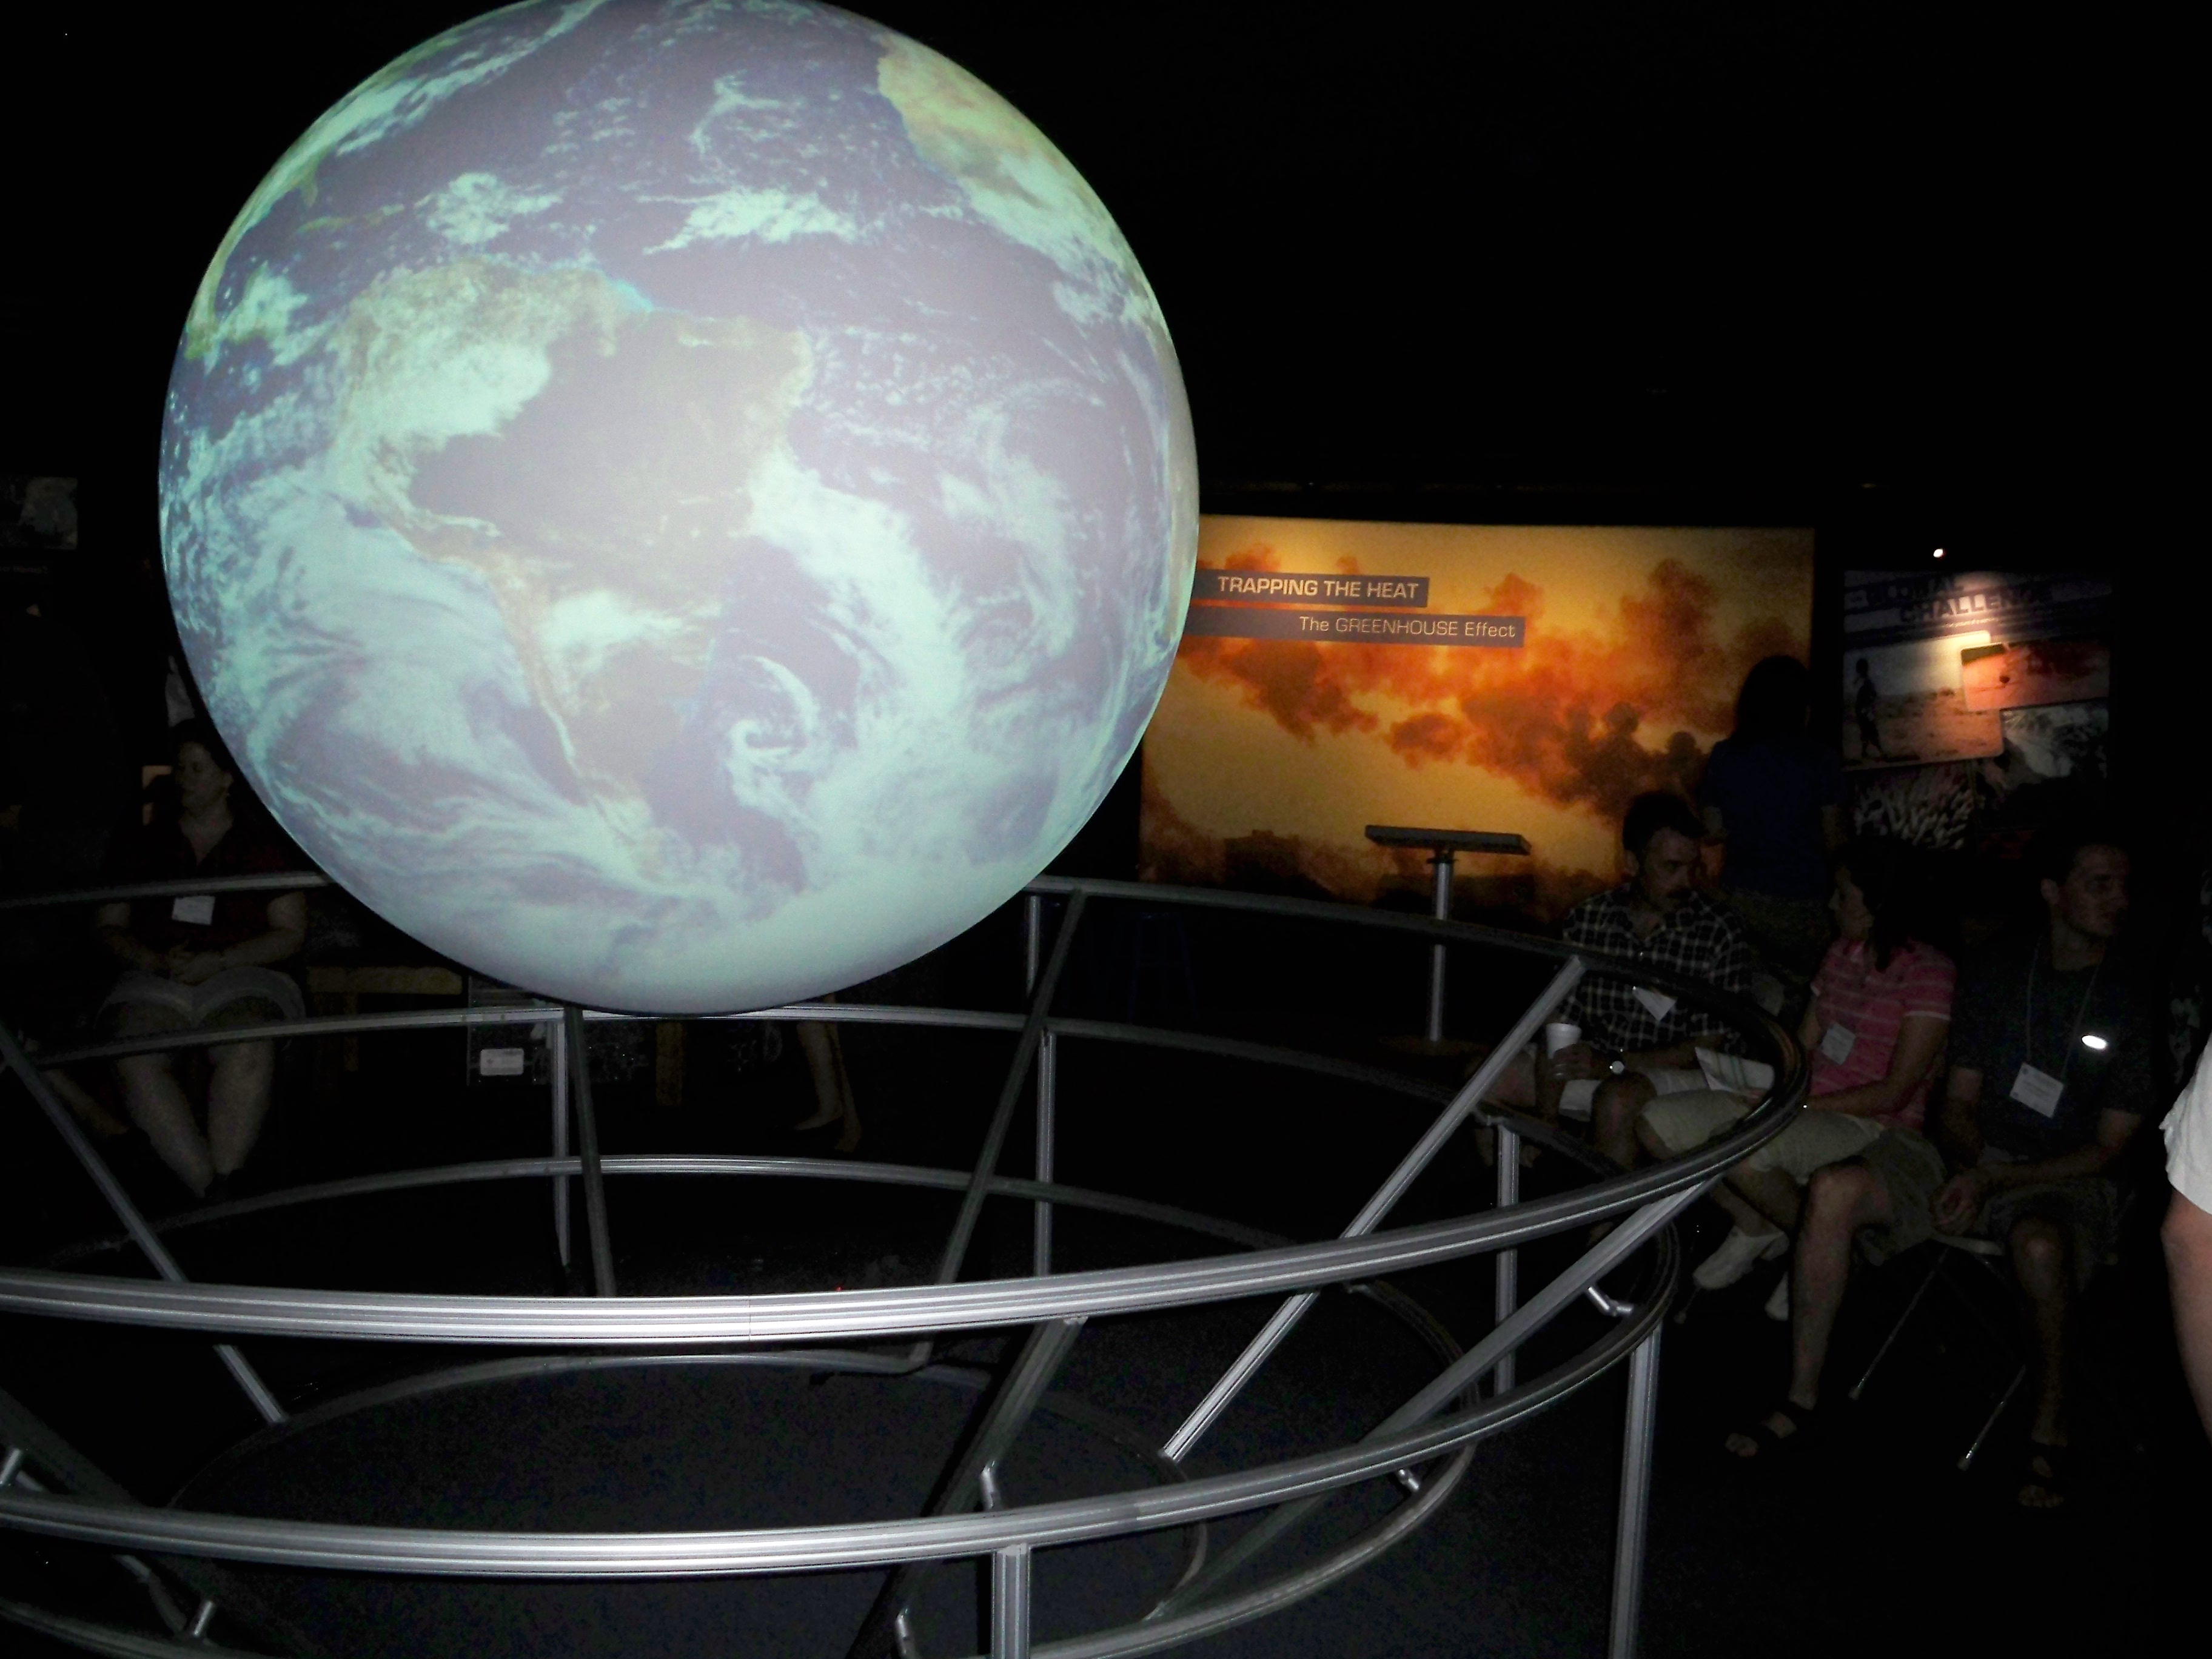 A group of people sit in folding chairs watching Science On a Sphere in a darkened room. Behind the Sphere another exhibit titled 'Trapping the Heat: The Greenhouse Effect' is visible